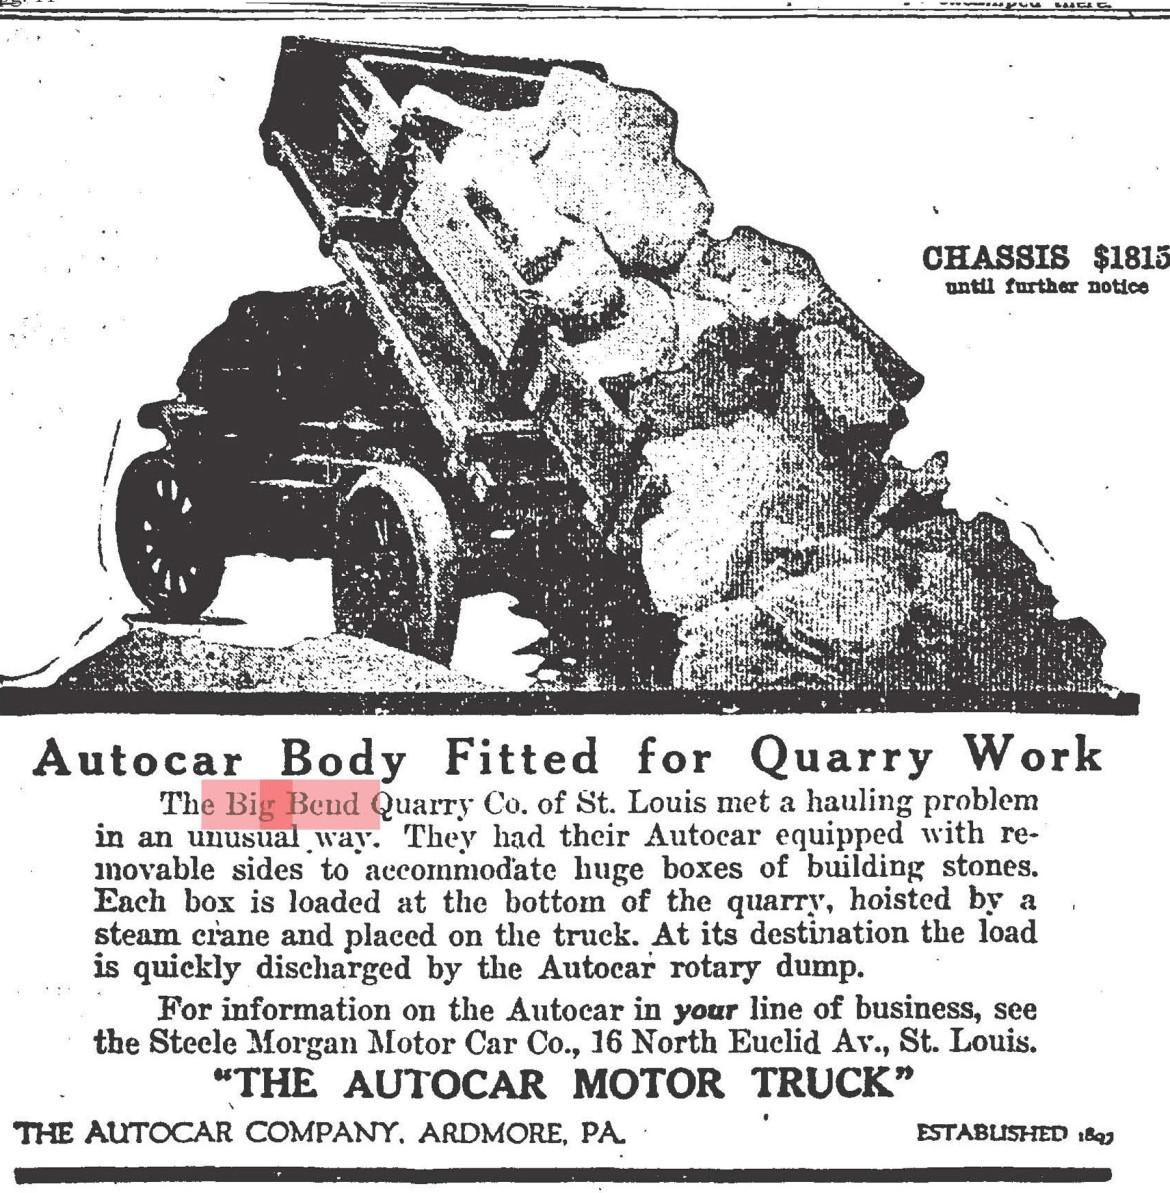 This advertisement appeared in the St. Louis Post-Dispatch in August of 1917.